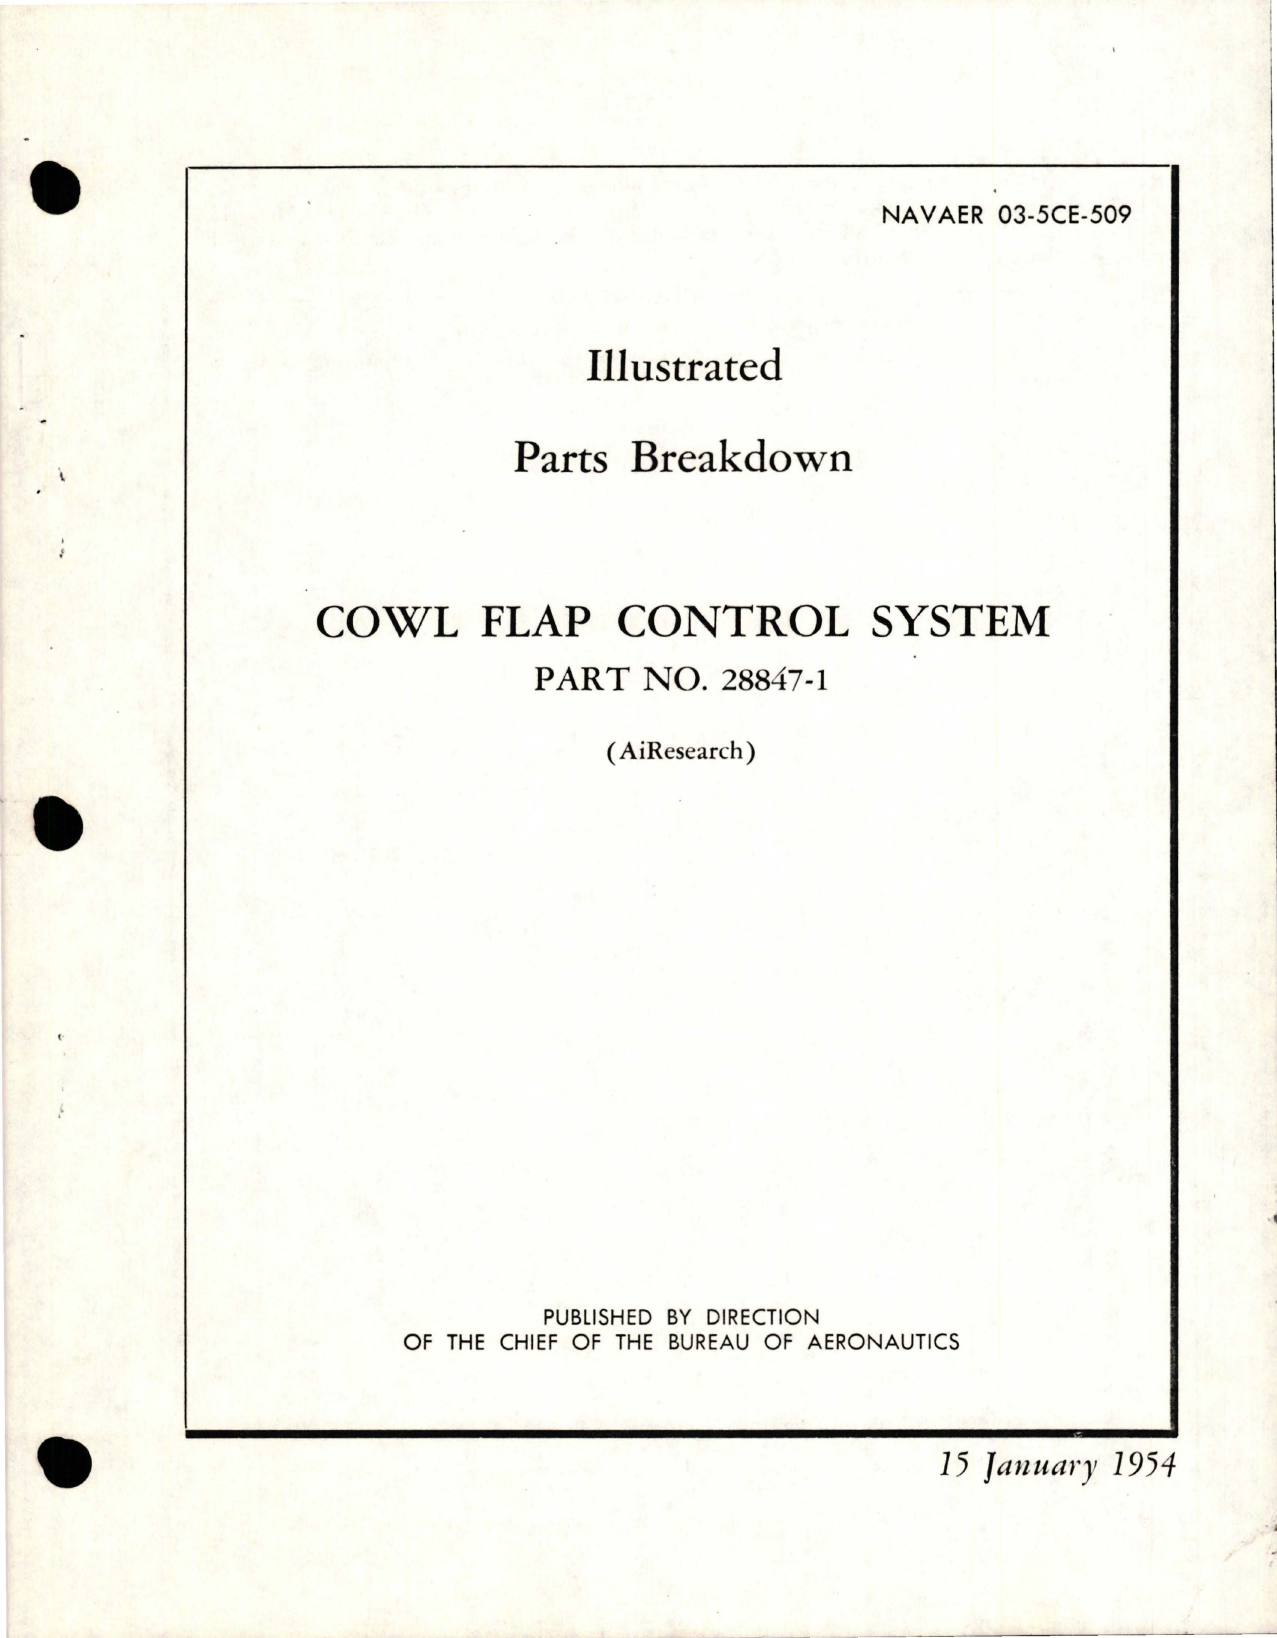 Sample page 1 from AirCorps Library document: Illustrated Parts Breakdown for Cowl Flap Control System - Part 28847-1